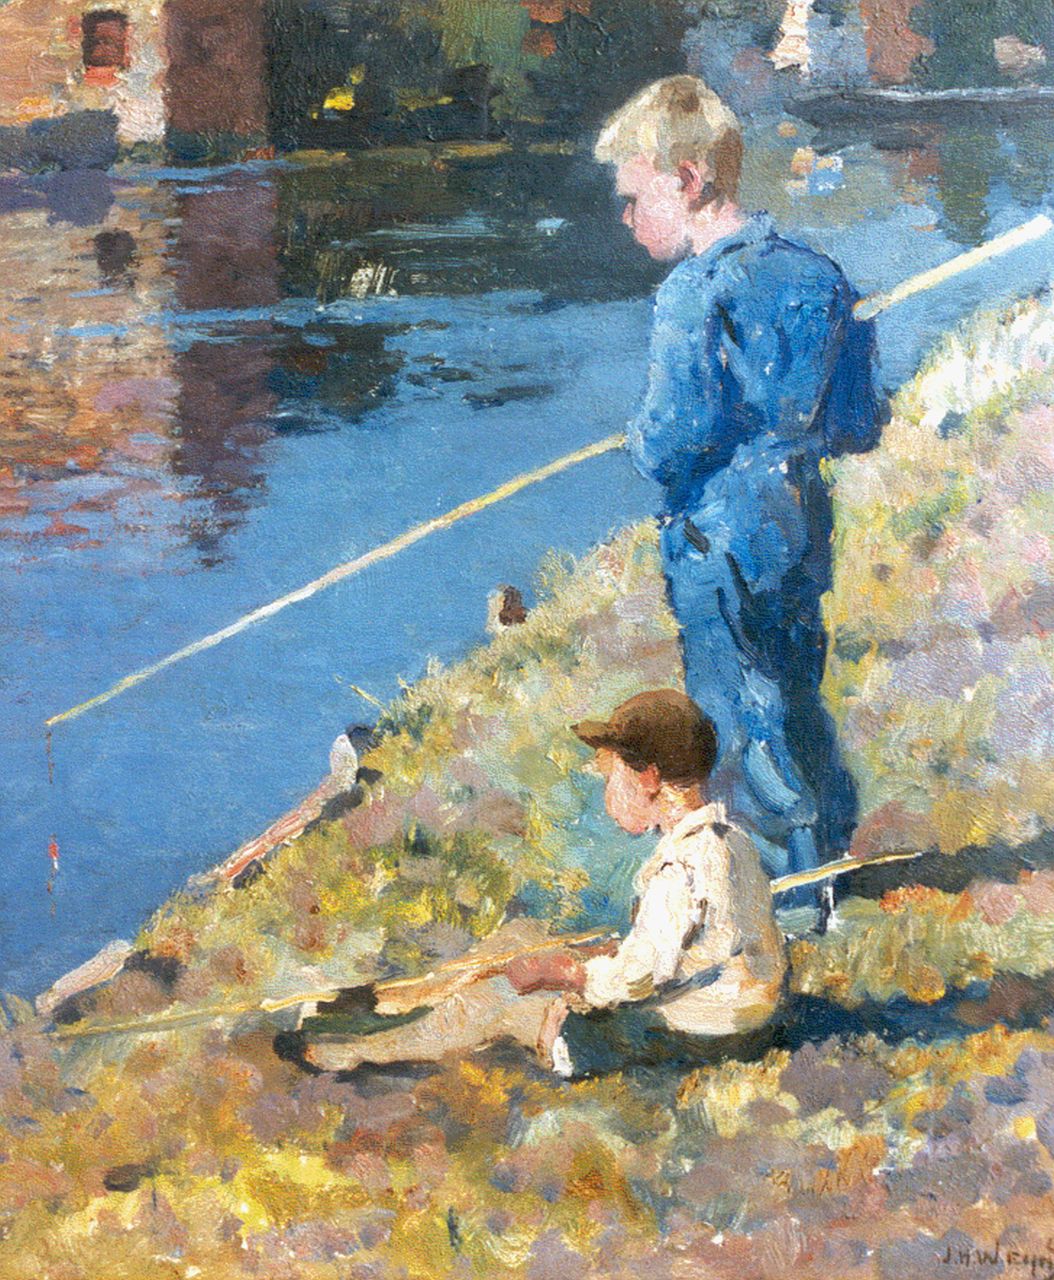 Weijns J.H.  | Jan Harm Weijns, Anglers from Katwijk, oil on painter's board 39.5 x 34.2 cm, signed l.r. and on the reverse